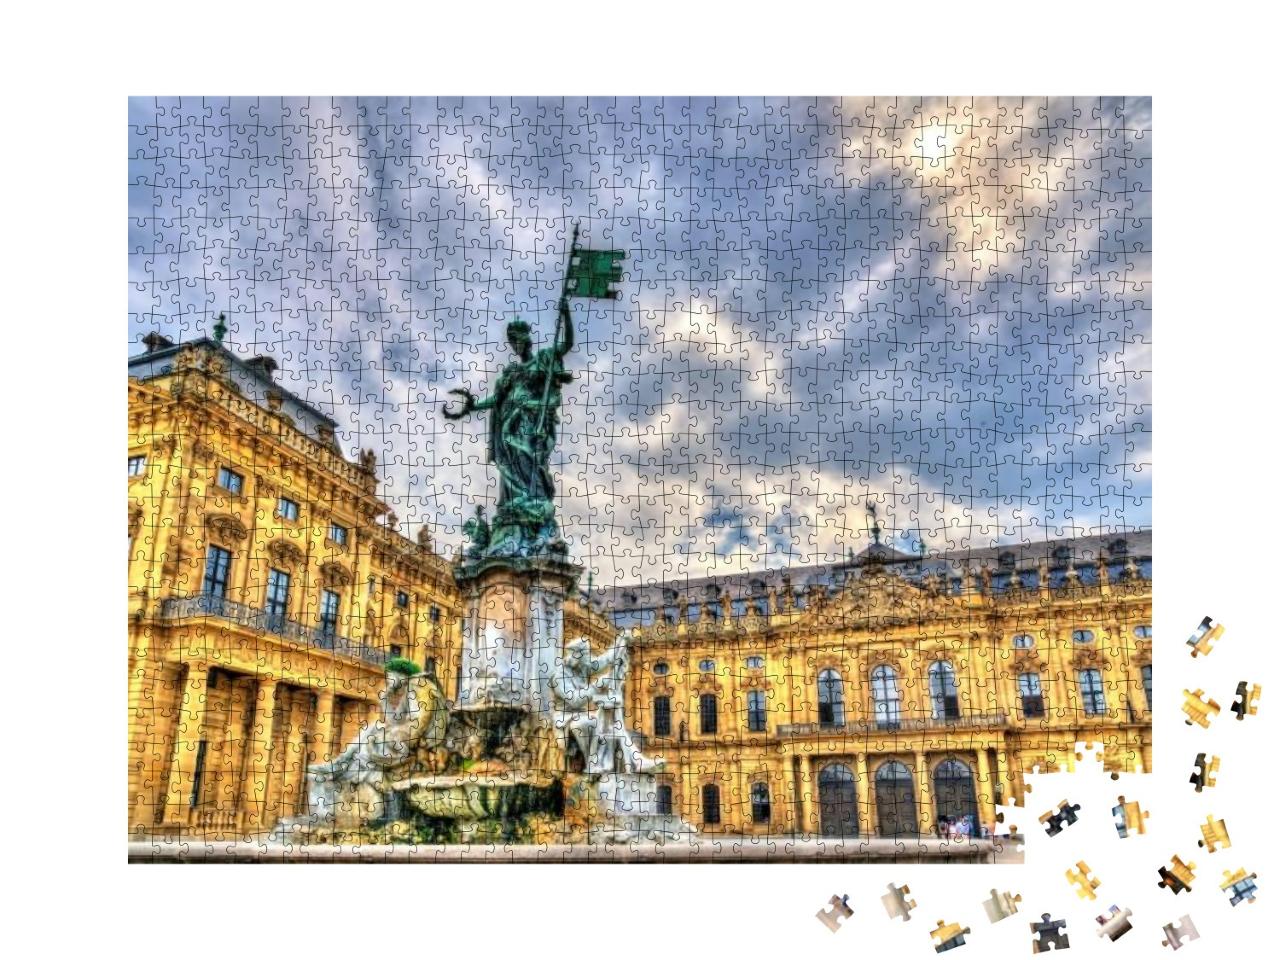 Franconia Fountain At the Wurzburg Residence in Bavaria... Jigsaw Puzzle with 1000 pieces